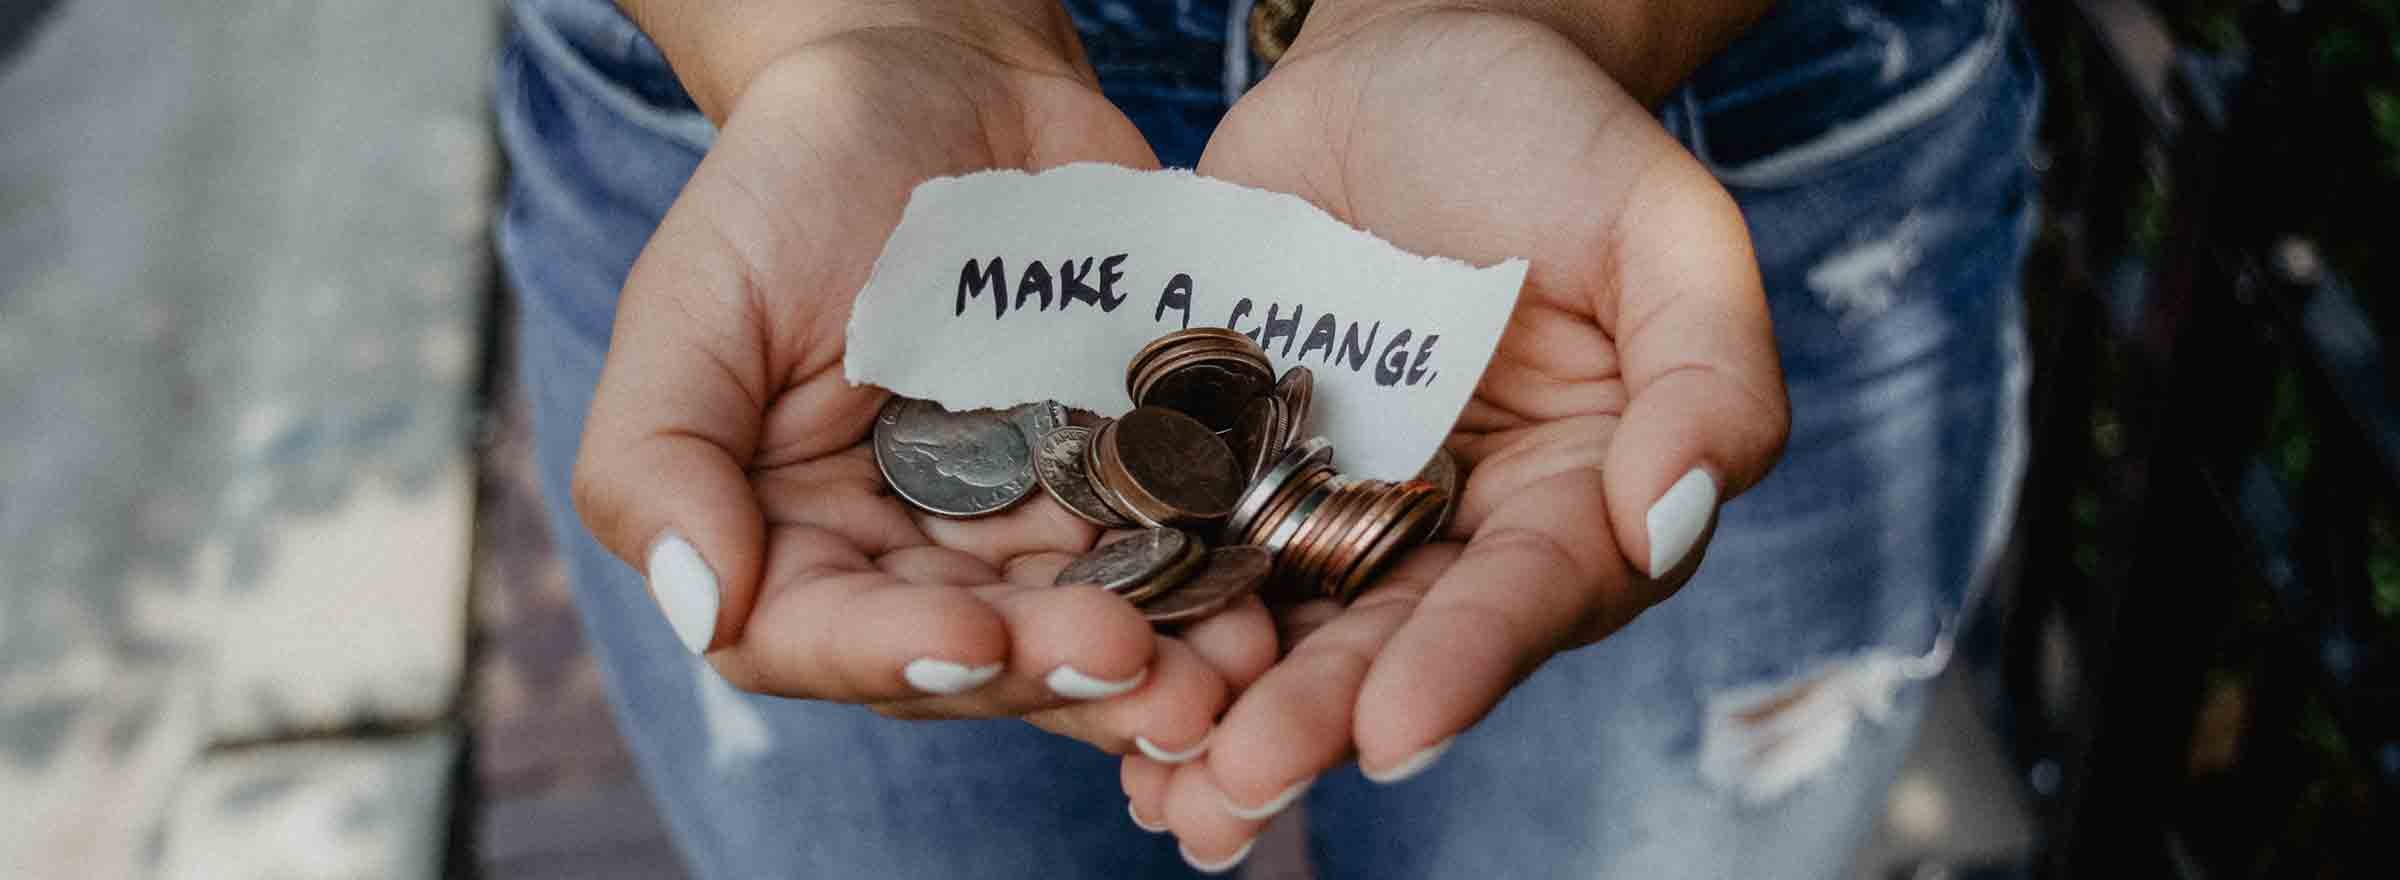 hands holding coins and a piece of paper that says make a change, representing the promise of monthly giving for nonprofit fundraising